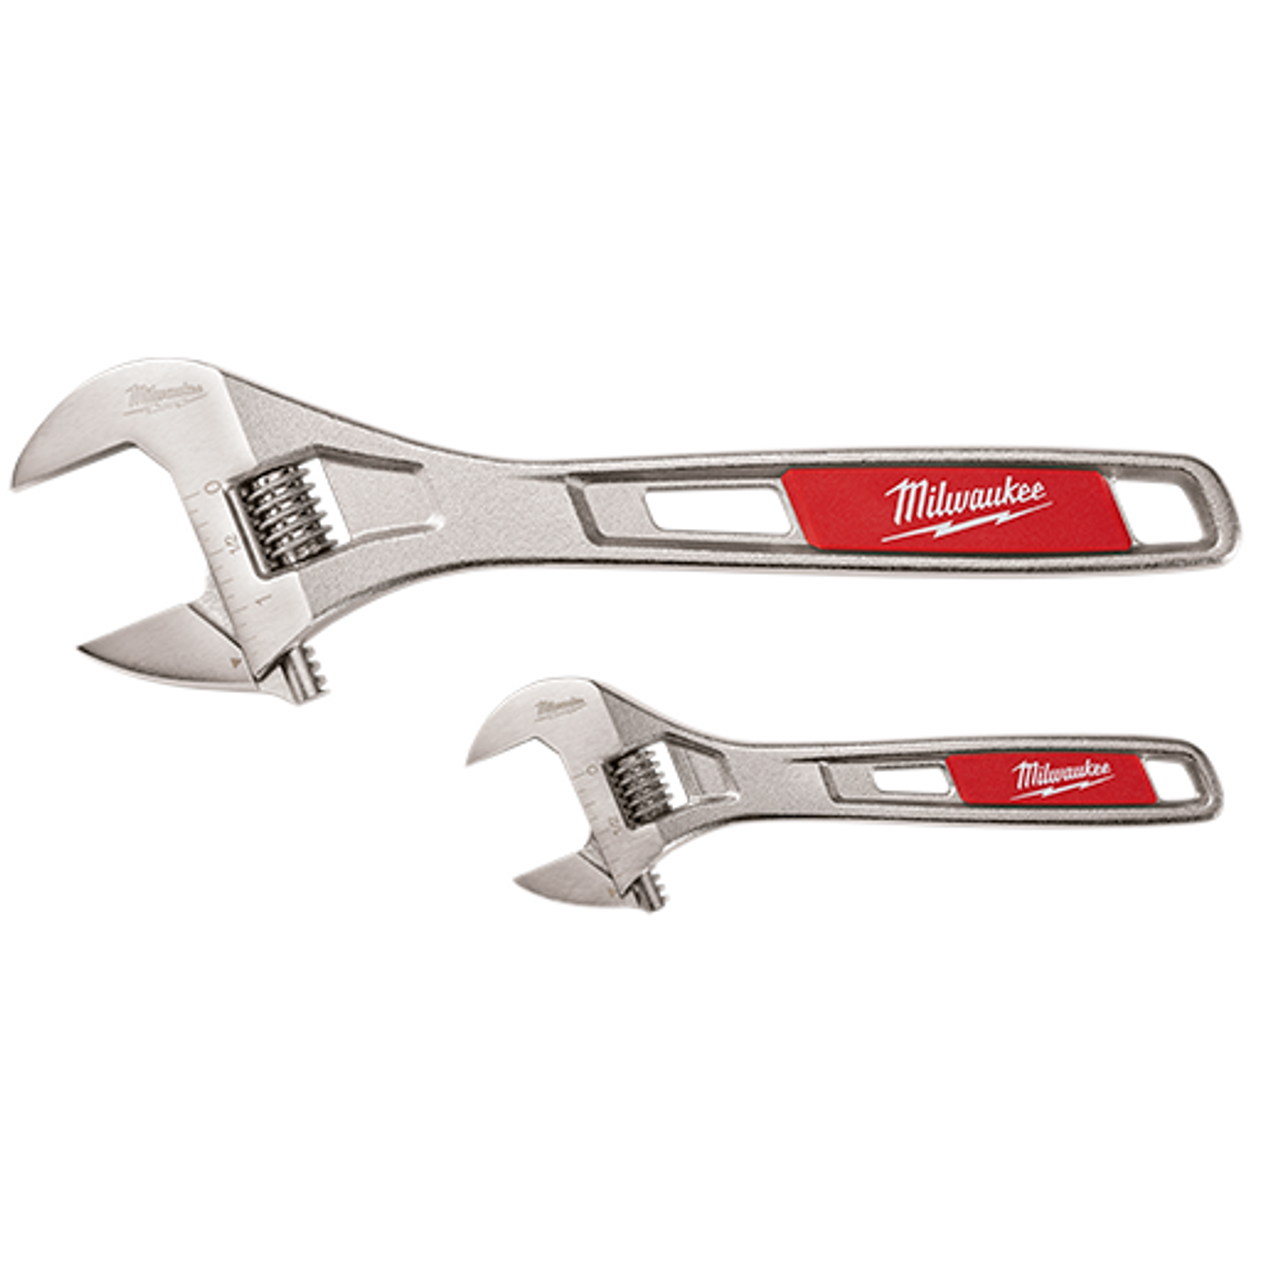 6 in. & 10 in. Adjustable Wrench 2 pack